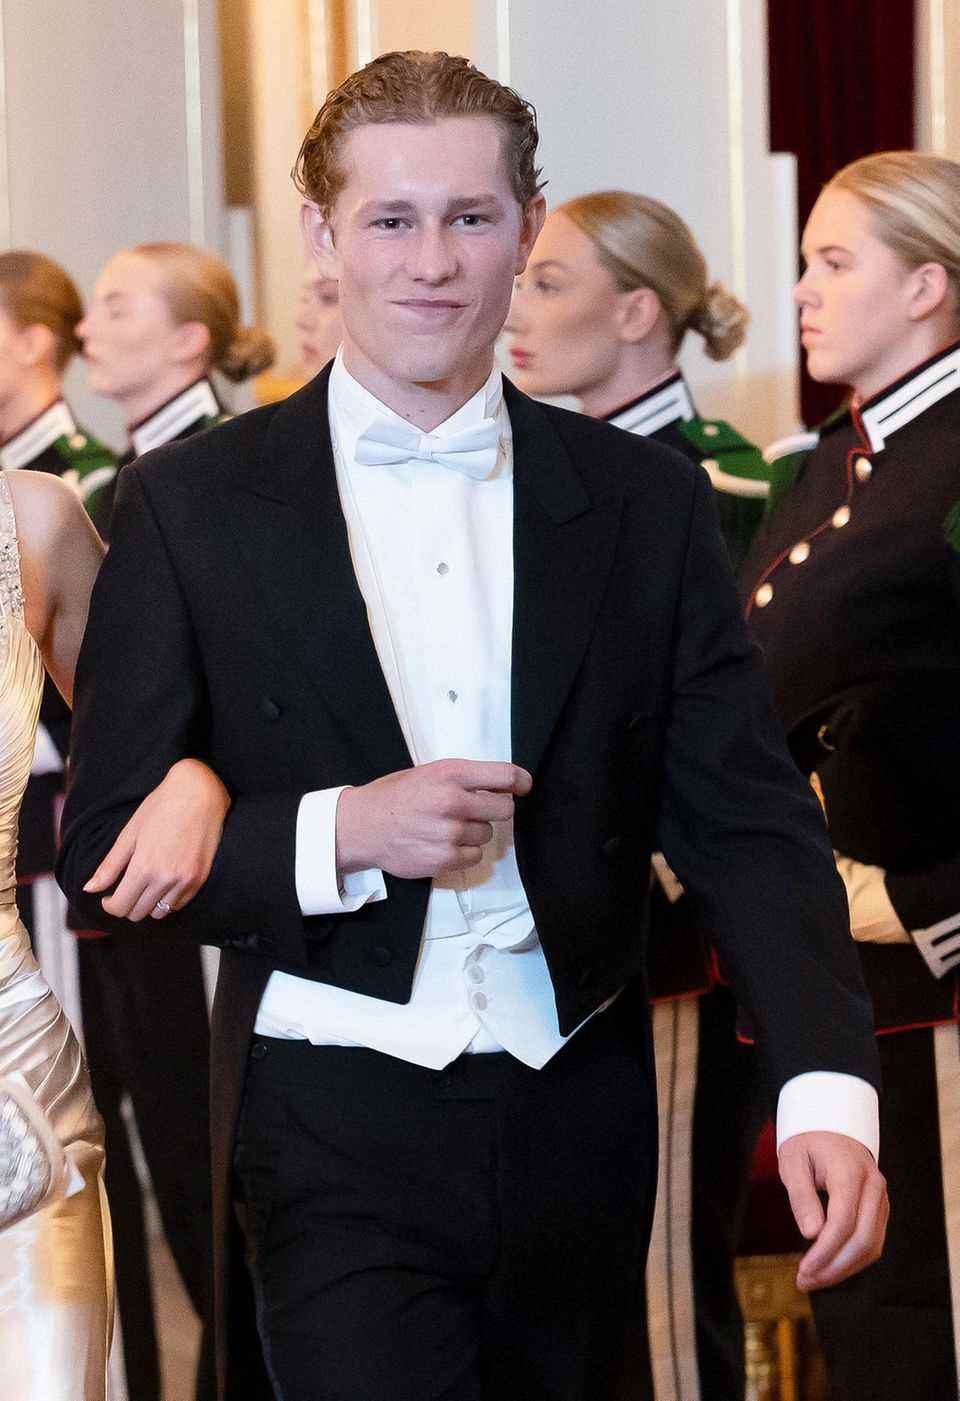 Is Magnus Helen Haugstad Princess Ingrid Alexandra's Boyfriend?  After all, he was invited to their big gala dinner on June 17, 2022 at the Royal Palace in Oslo, where this photo was taken.